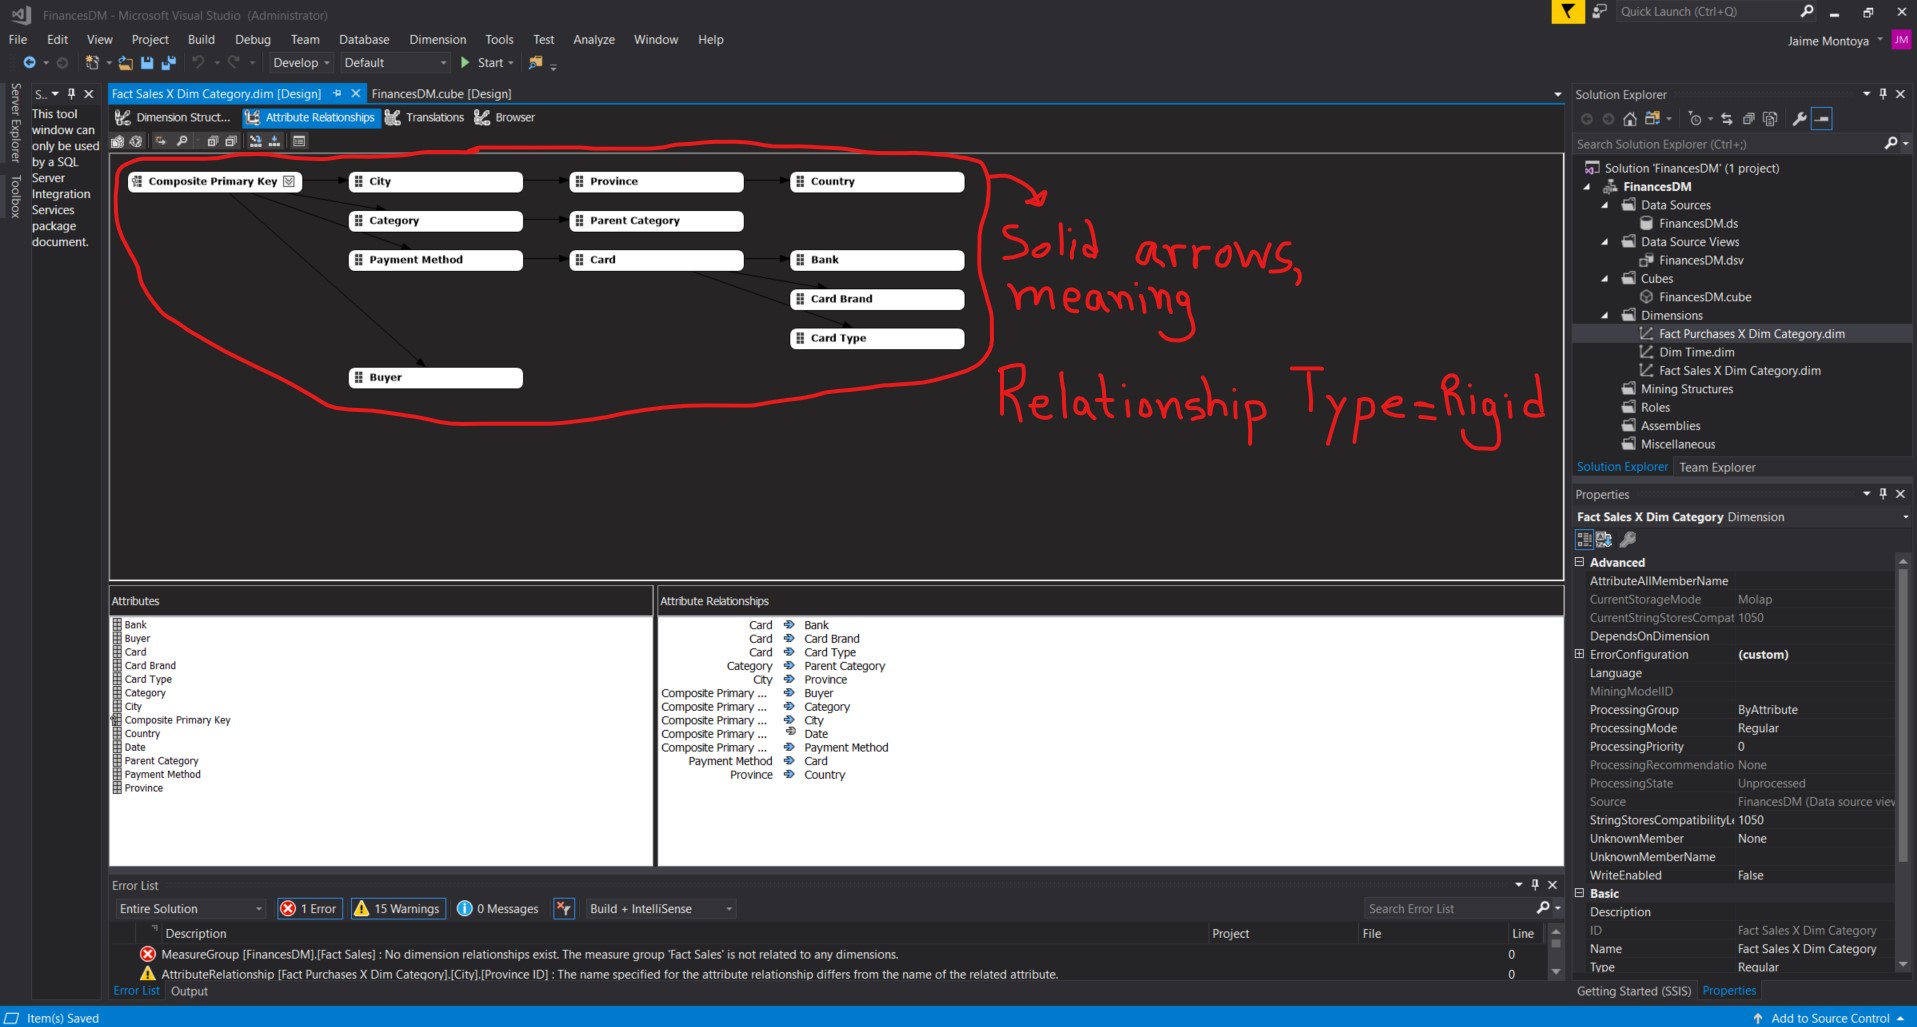 Show solid arrows for Relationship Type Rigid